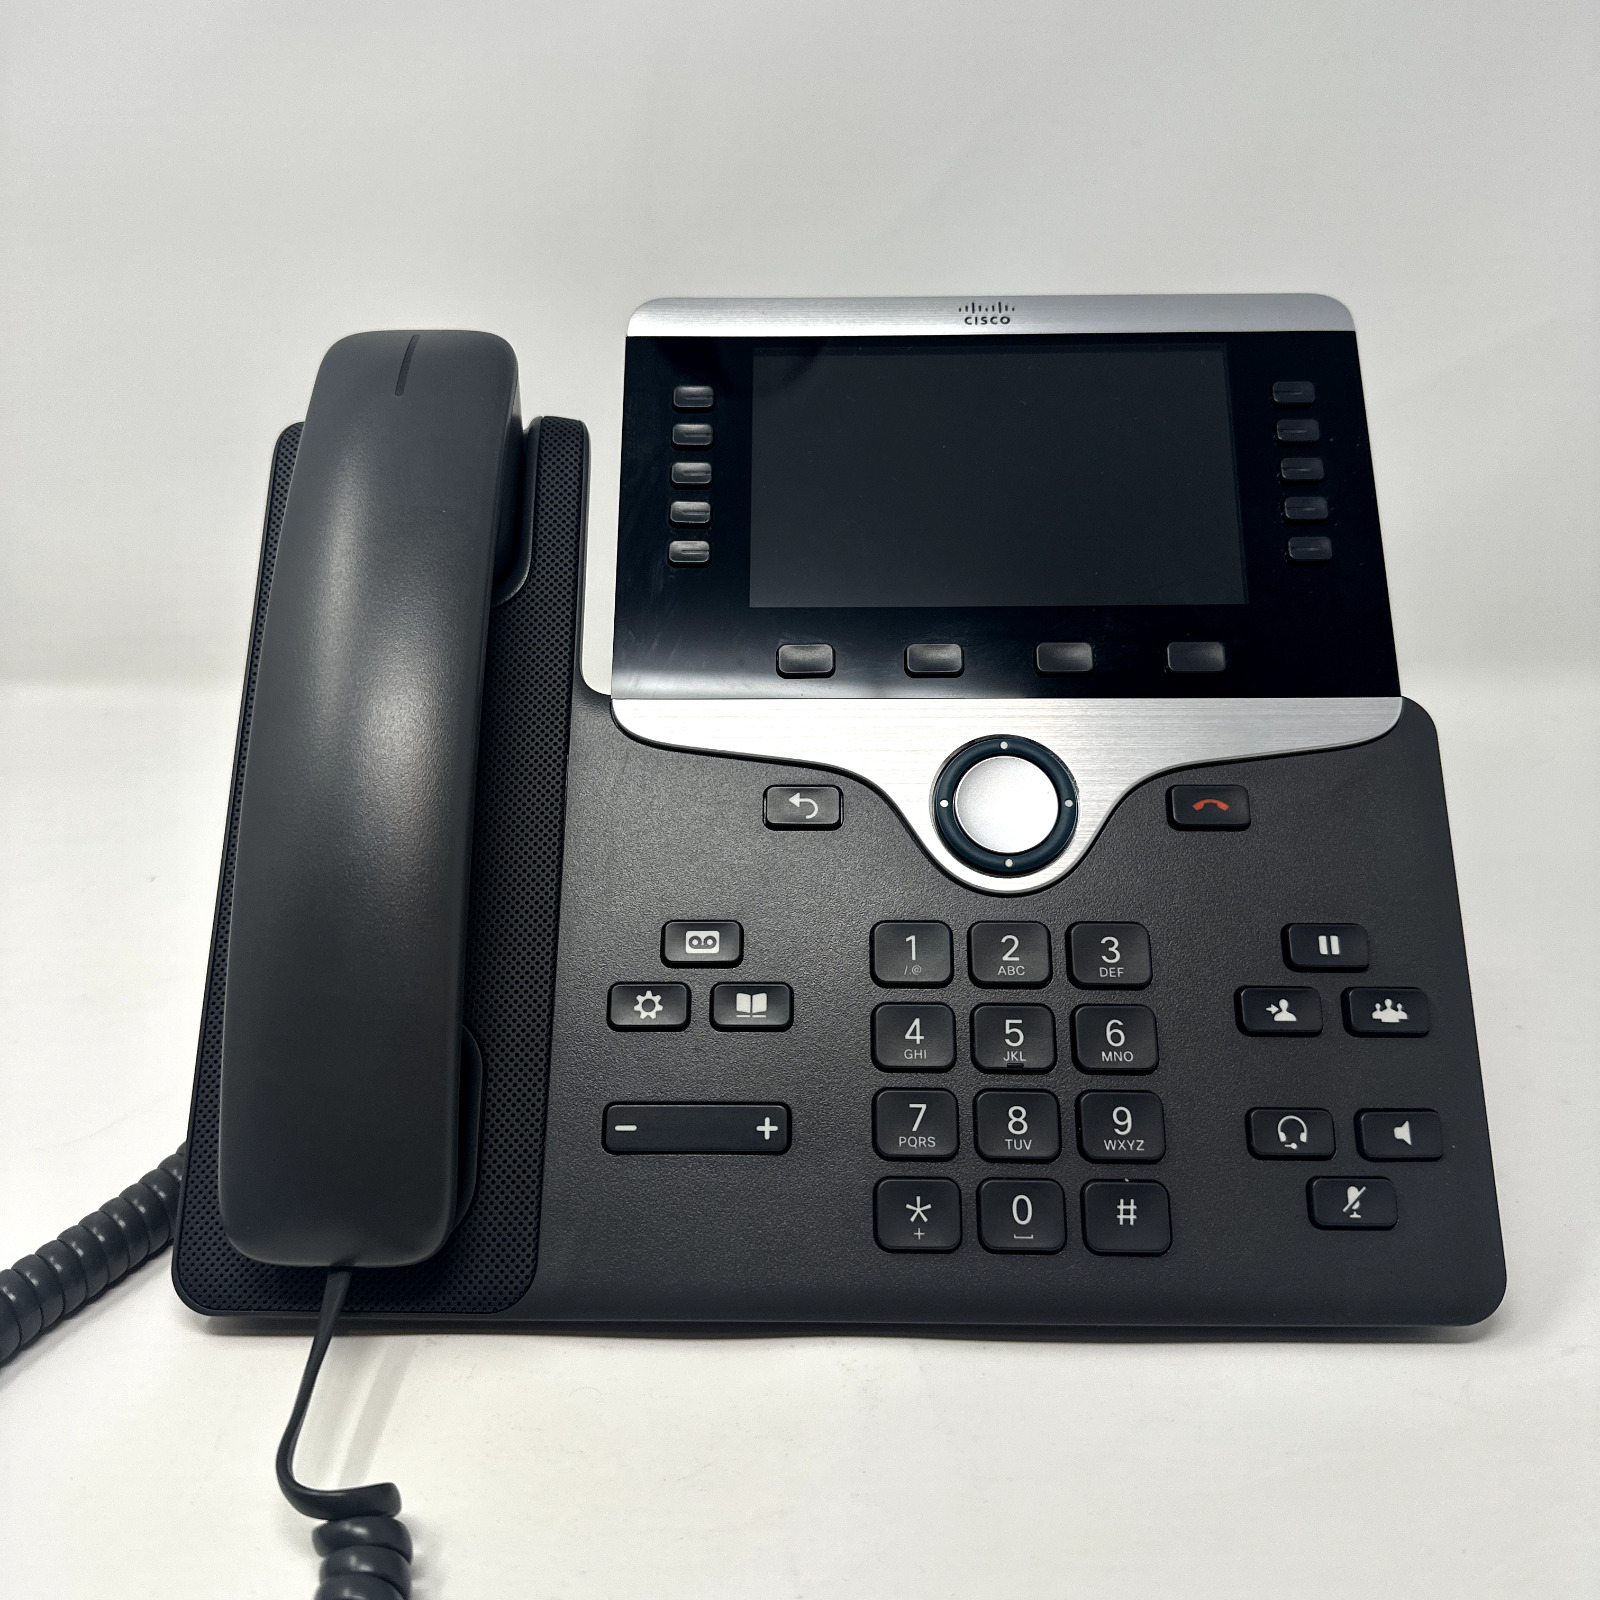 Cisco 8800 Ser. CP-8851-K9 Unified IP Endpoint VoIP Video Phone w/Stand